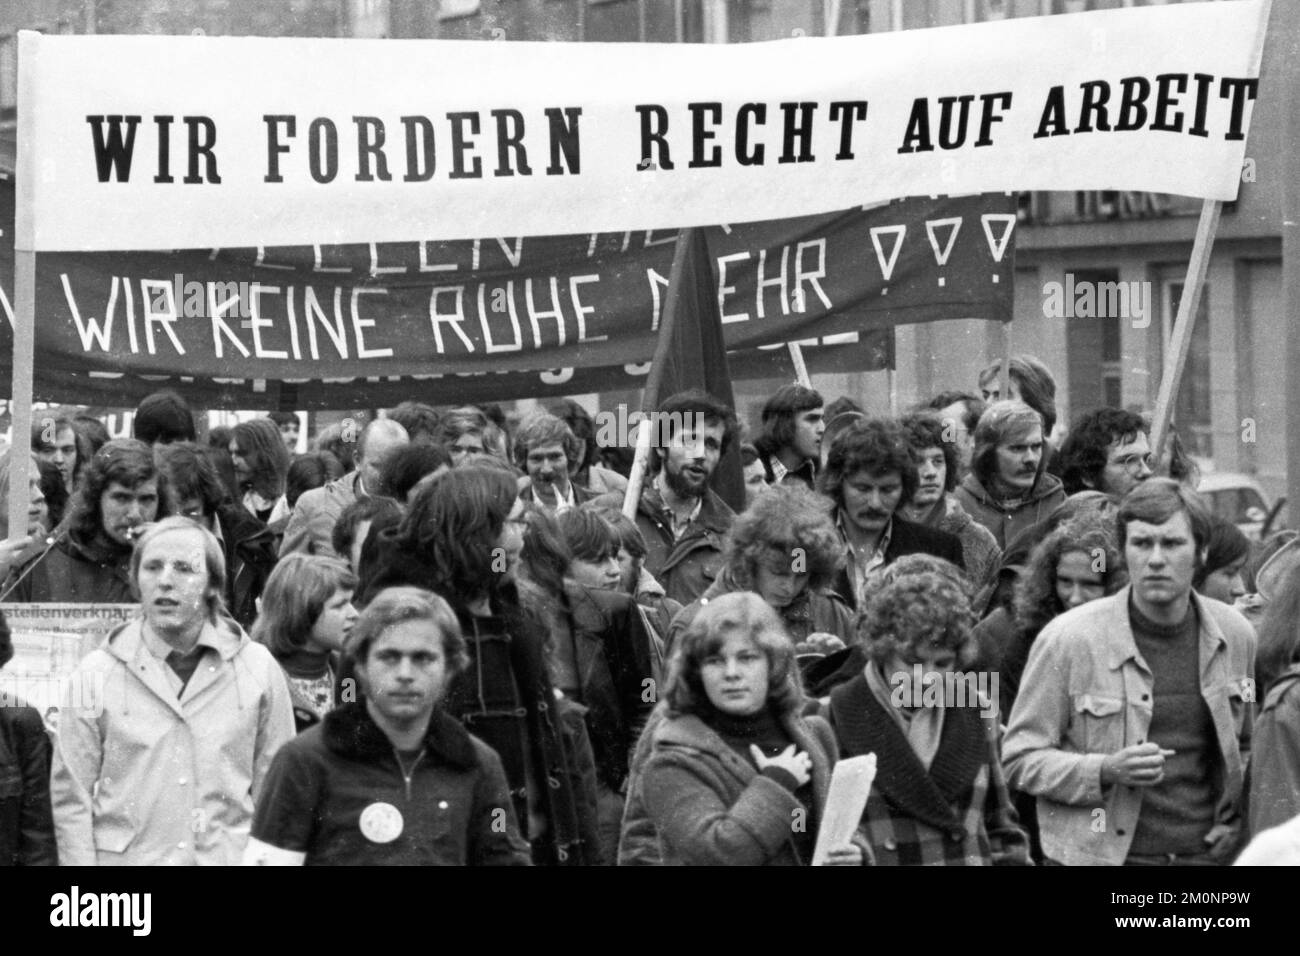 Called by the DGB youth, about 2000 mostly young people demonstrated on 25.10.1975 for co-determination and against unemployment in Giessen, Germany, Stock Photo